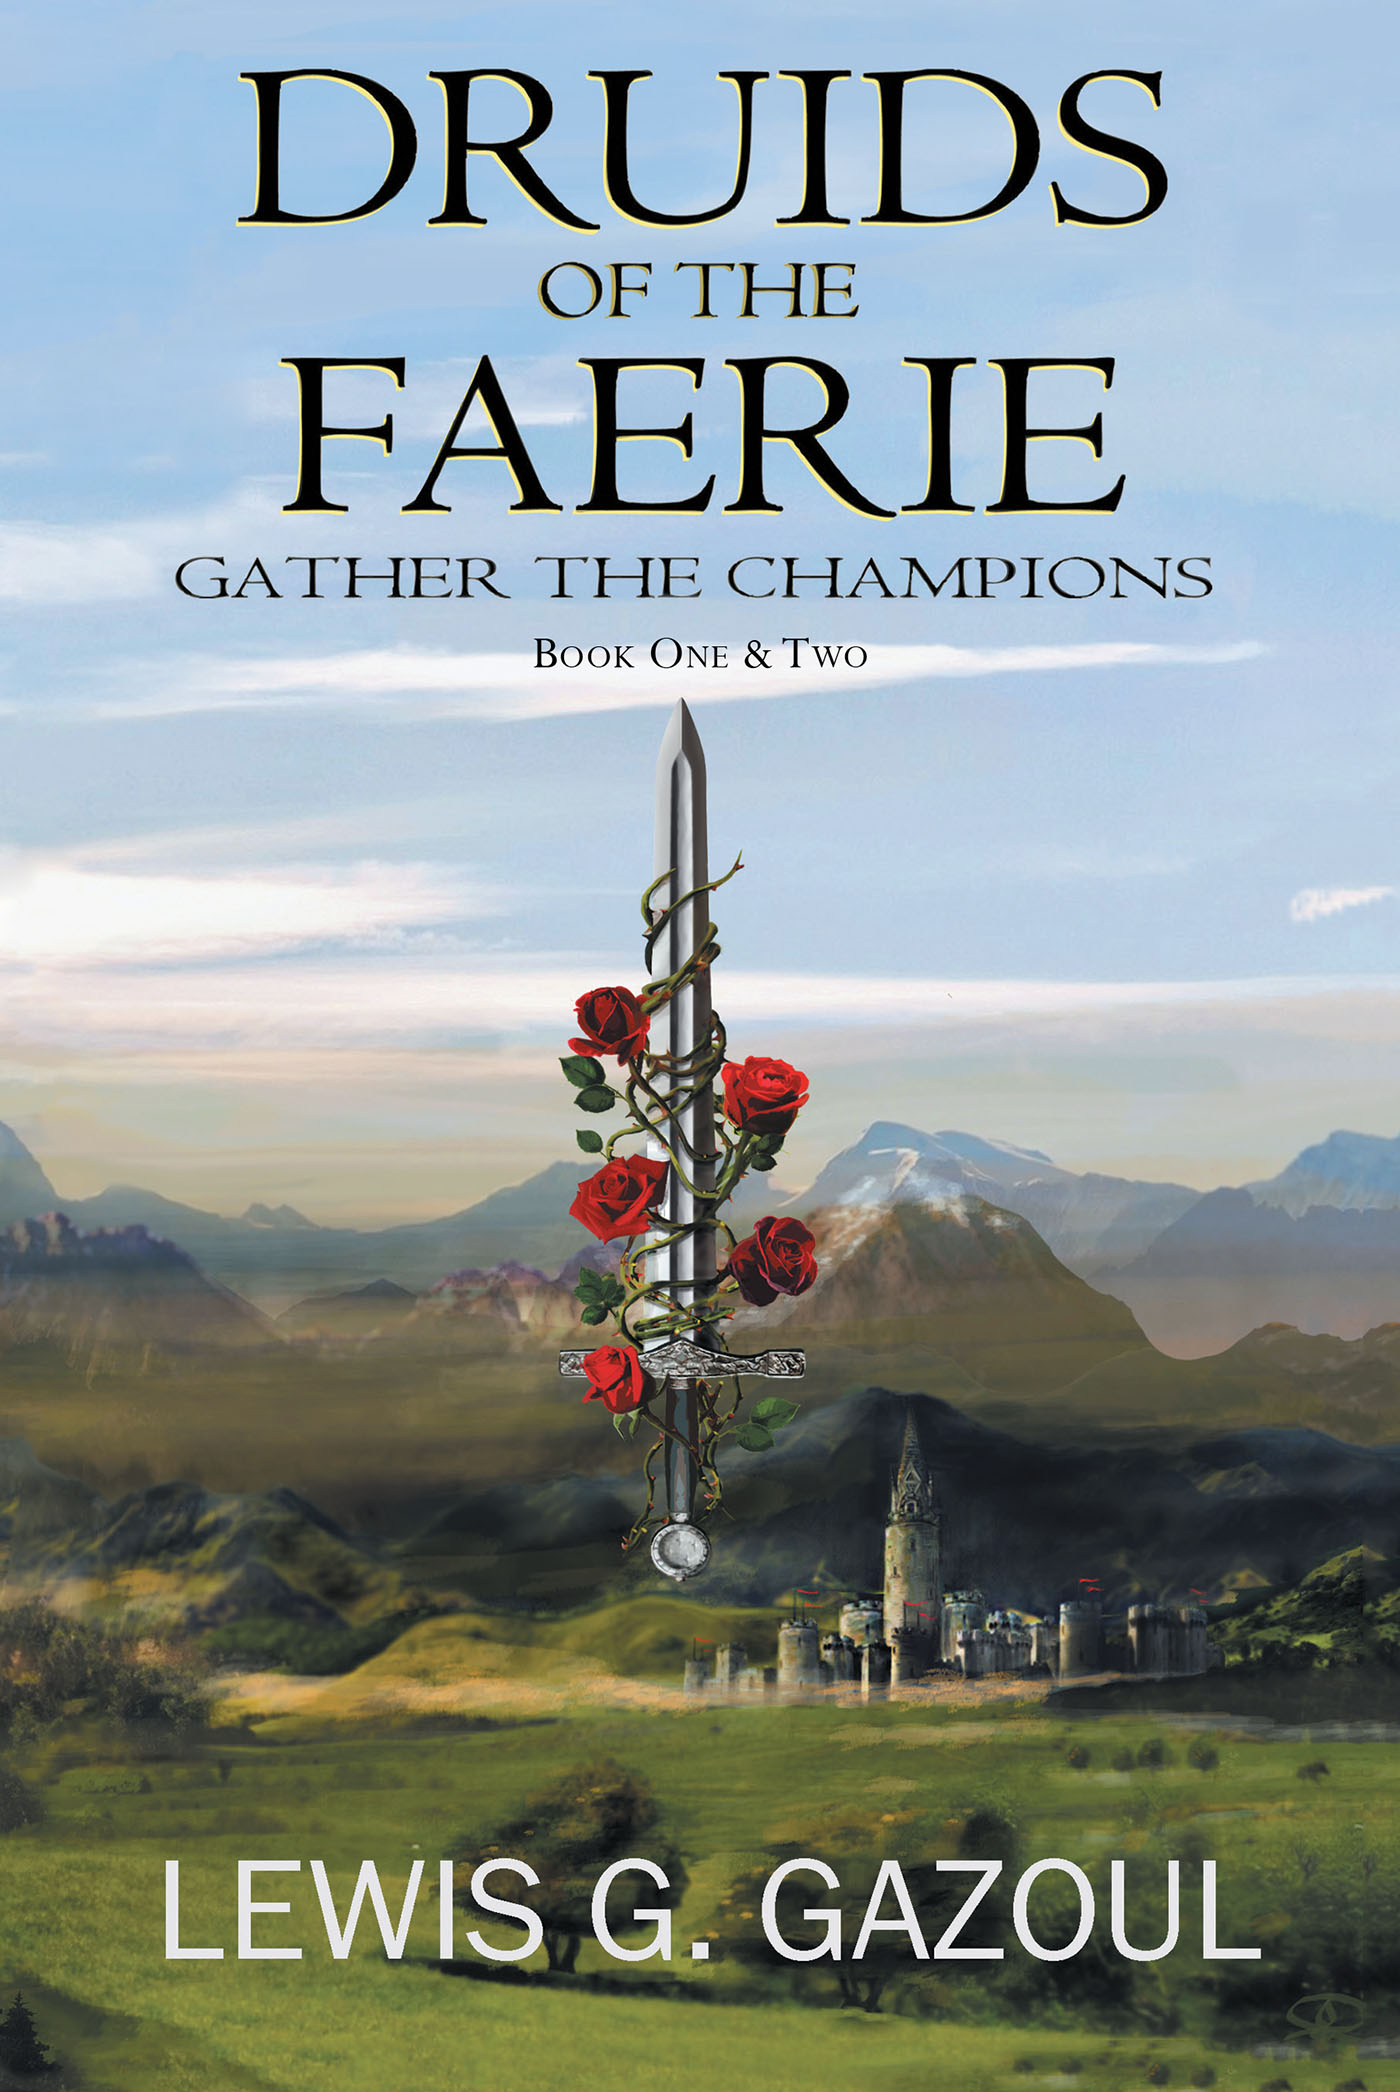 Lewis G. Gazoul’s New Book, “Druids Of The Faerie: Gather The Champions” is an Exciting Fantasy Novel About a Young Prince Breaking Free from His Father’s Reign of Terror